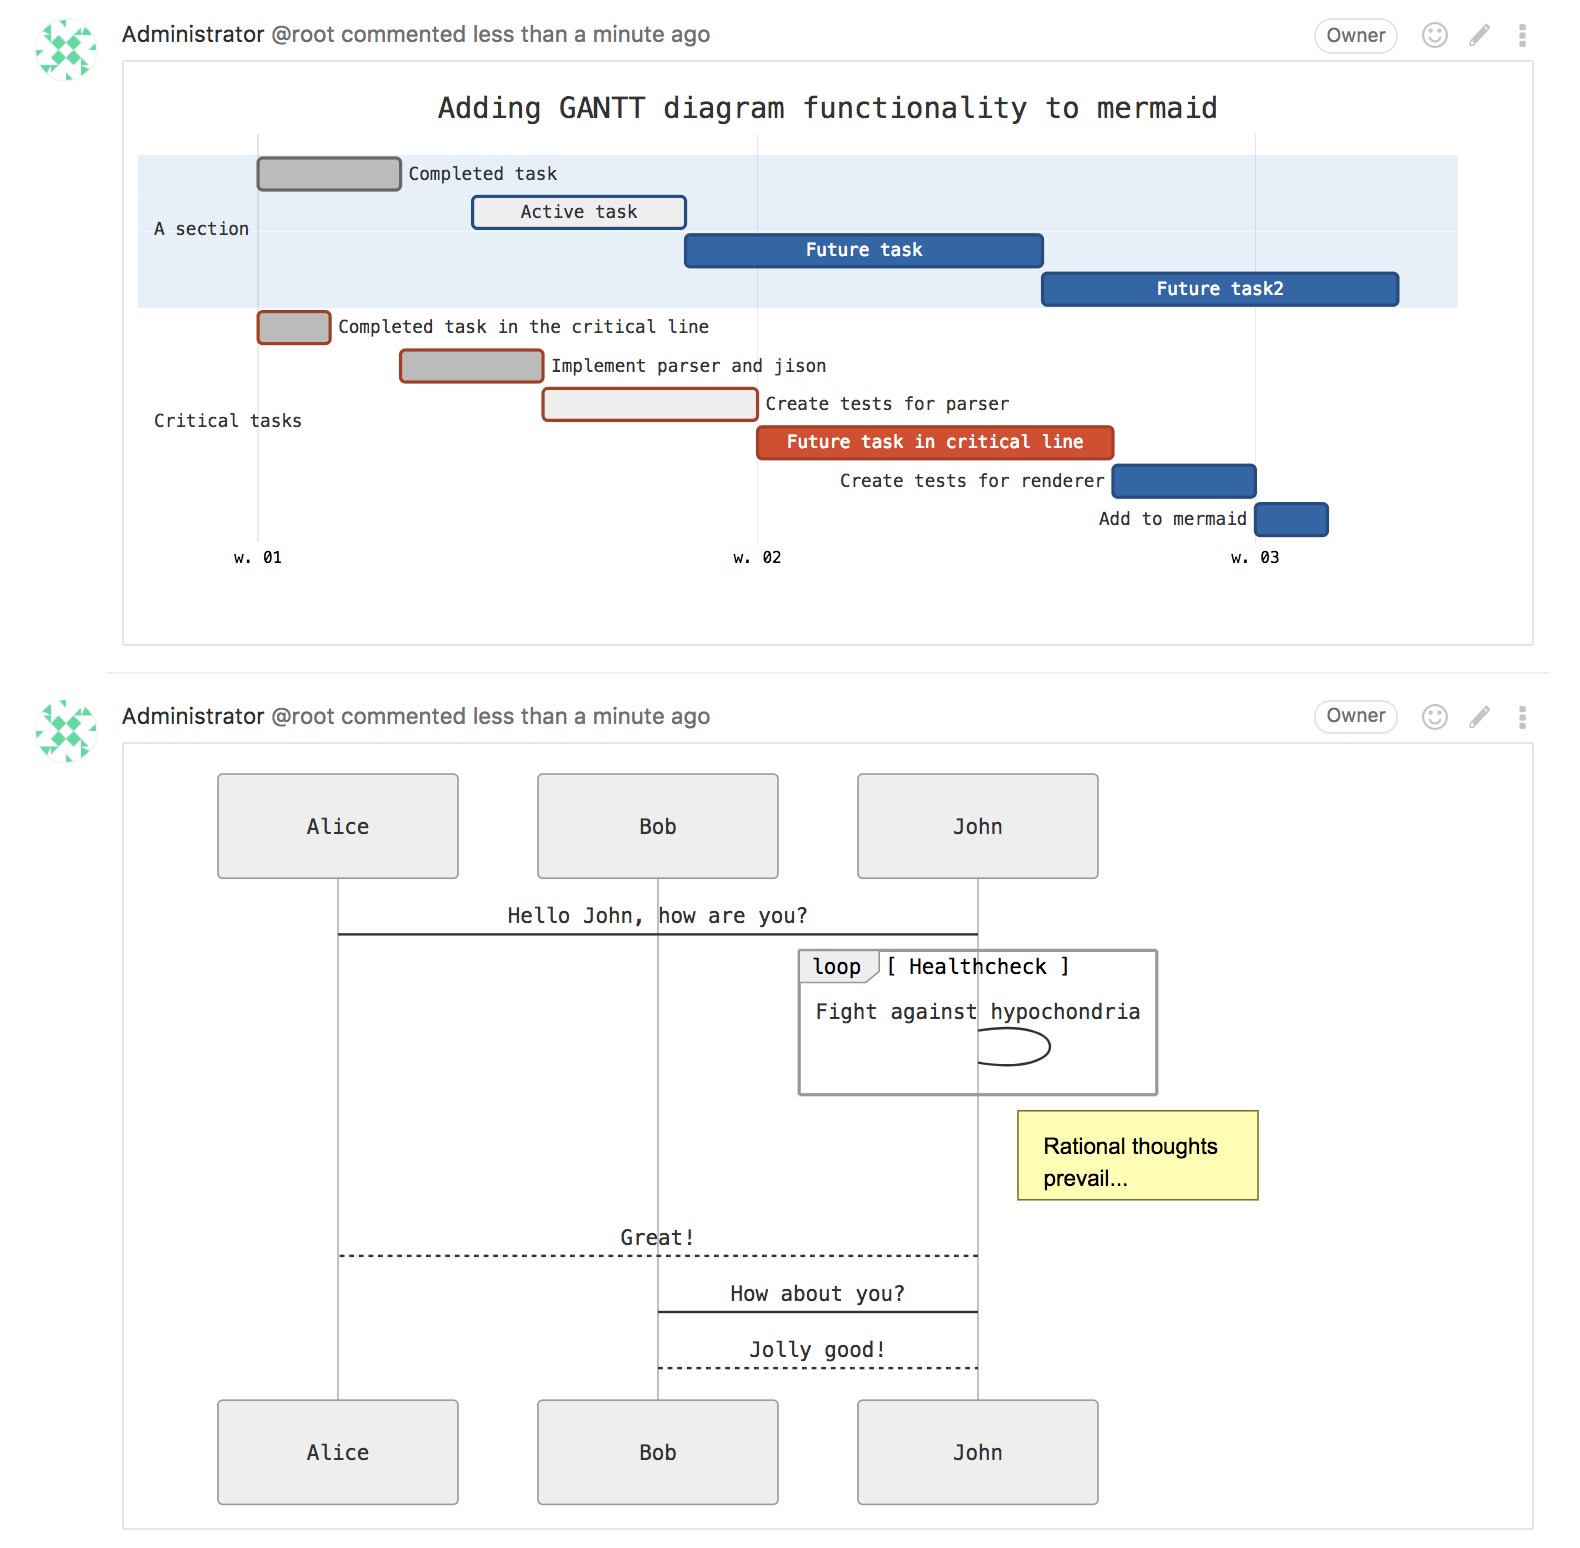 Flow charts, sequence diagrams, and Gantt diagrams in GitLab Flavored Markdown (GFM) with Mermaid